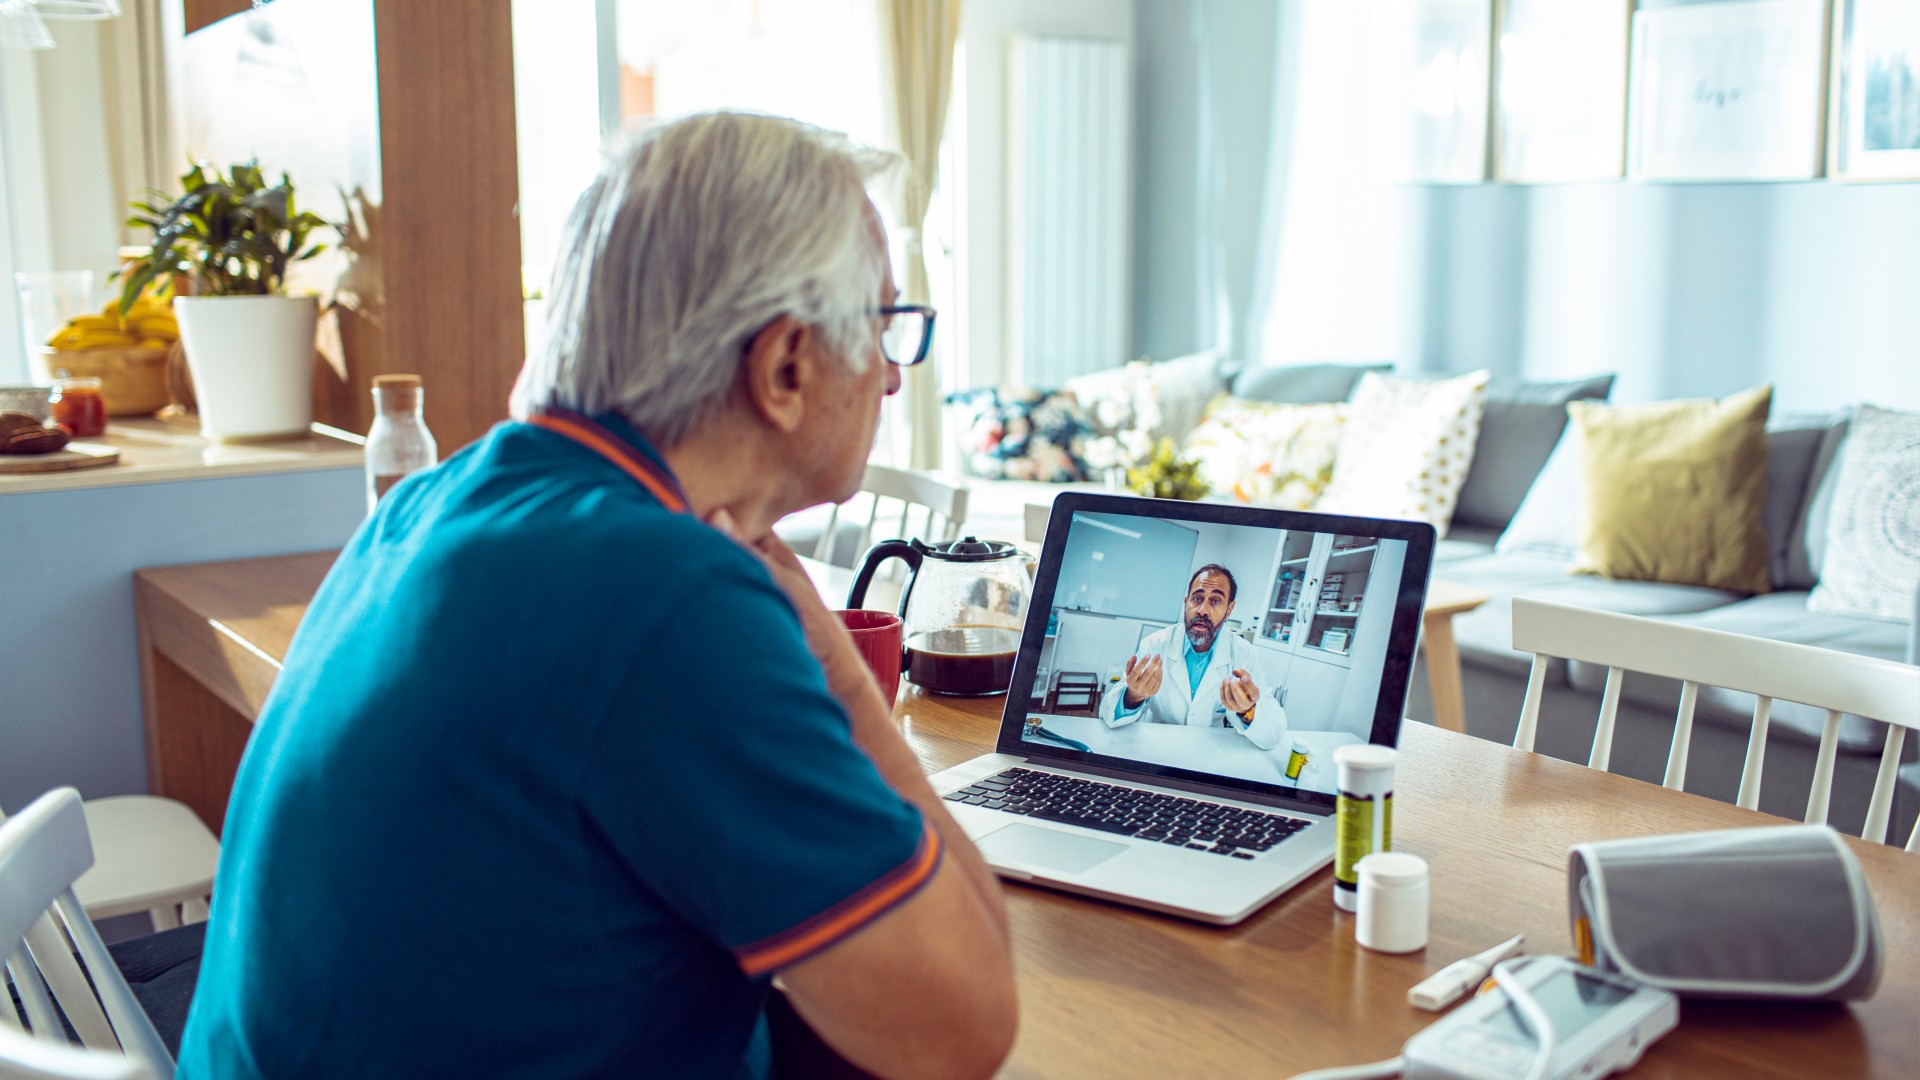 Building on more than a decade of investment to be on the leading edge of virtual health, Atrium Health is now offering a complete array of virtual care capabilities, Atrium Health Virtual Edge. 